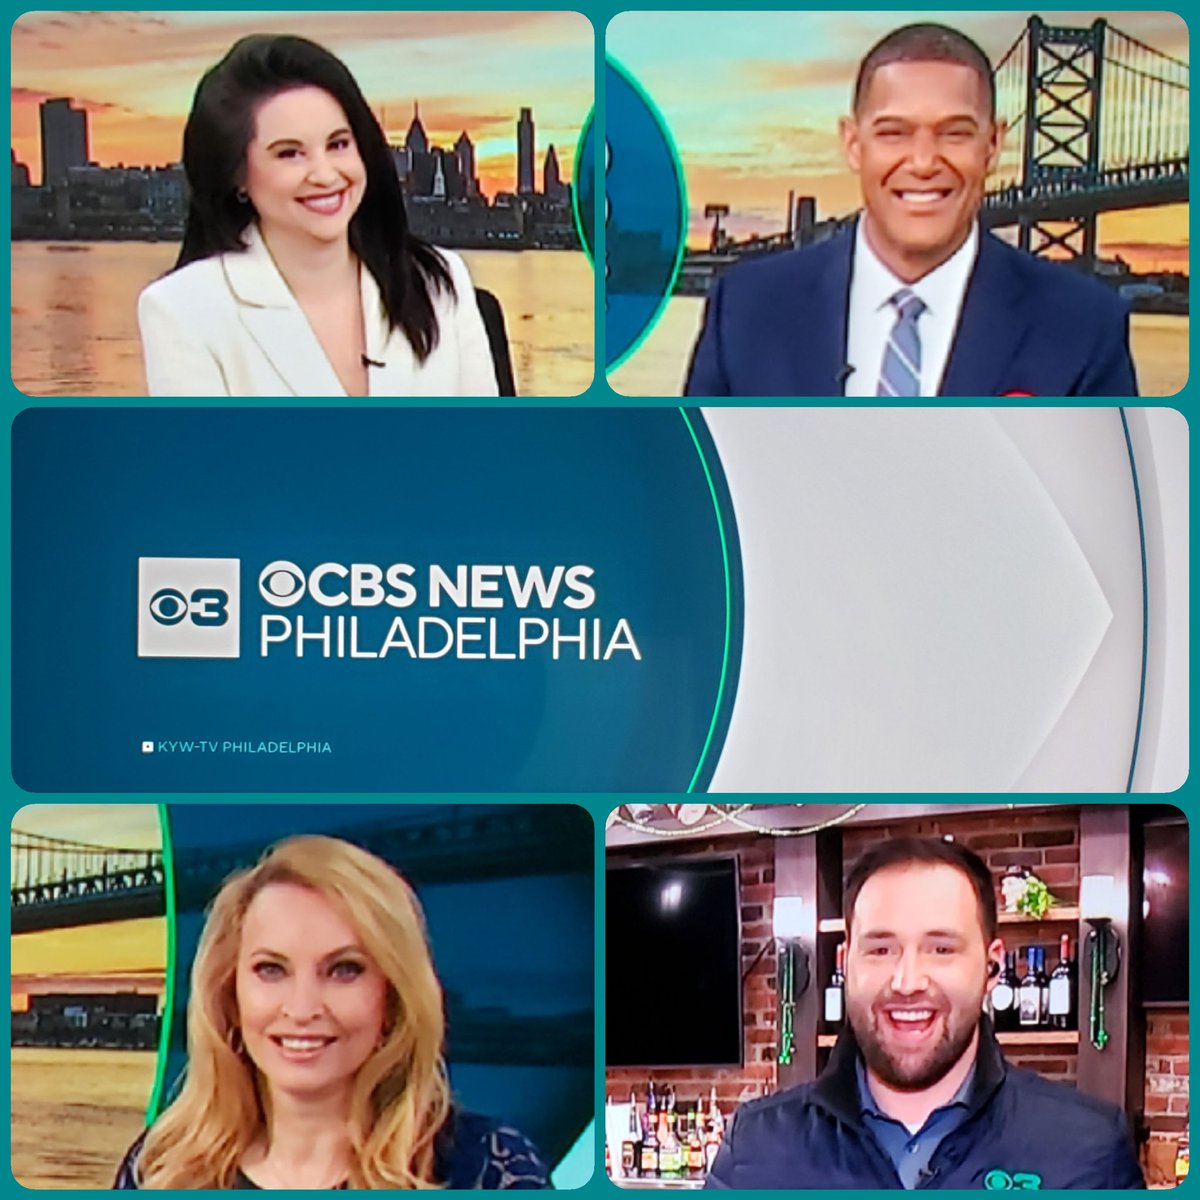 Good Saturday morning to the #WeekendEdition of #CBSNewsPhiladelphia @CBSPhiladelphia with @JanCarabeoCBS3 @HMonroeNews @TammieSouza and @RossDiMattei Have a great Saturday y'all! Remember: #LoveYouGuys 💖🥰💞😍💝 #ByeBye 👍🏾👍🏾🤎🤗🤎👋🏼👋🏼💯♑💯♑💖💞💗
#🙏🏾✝️🕊💗